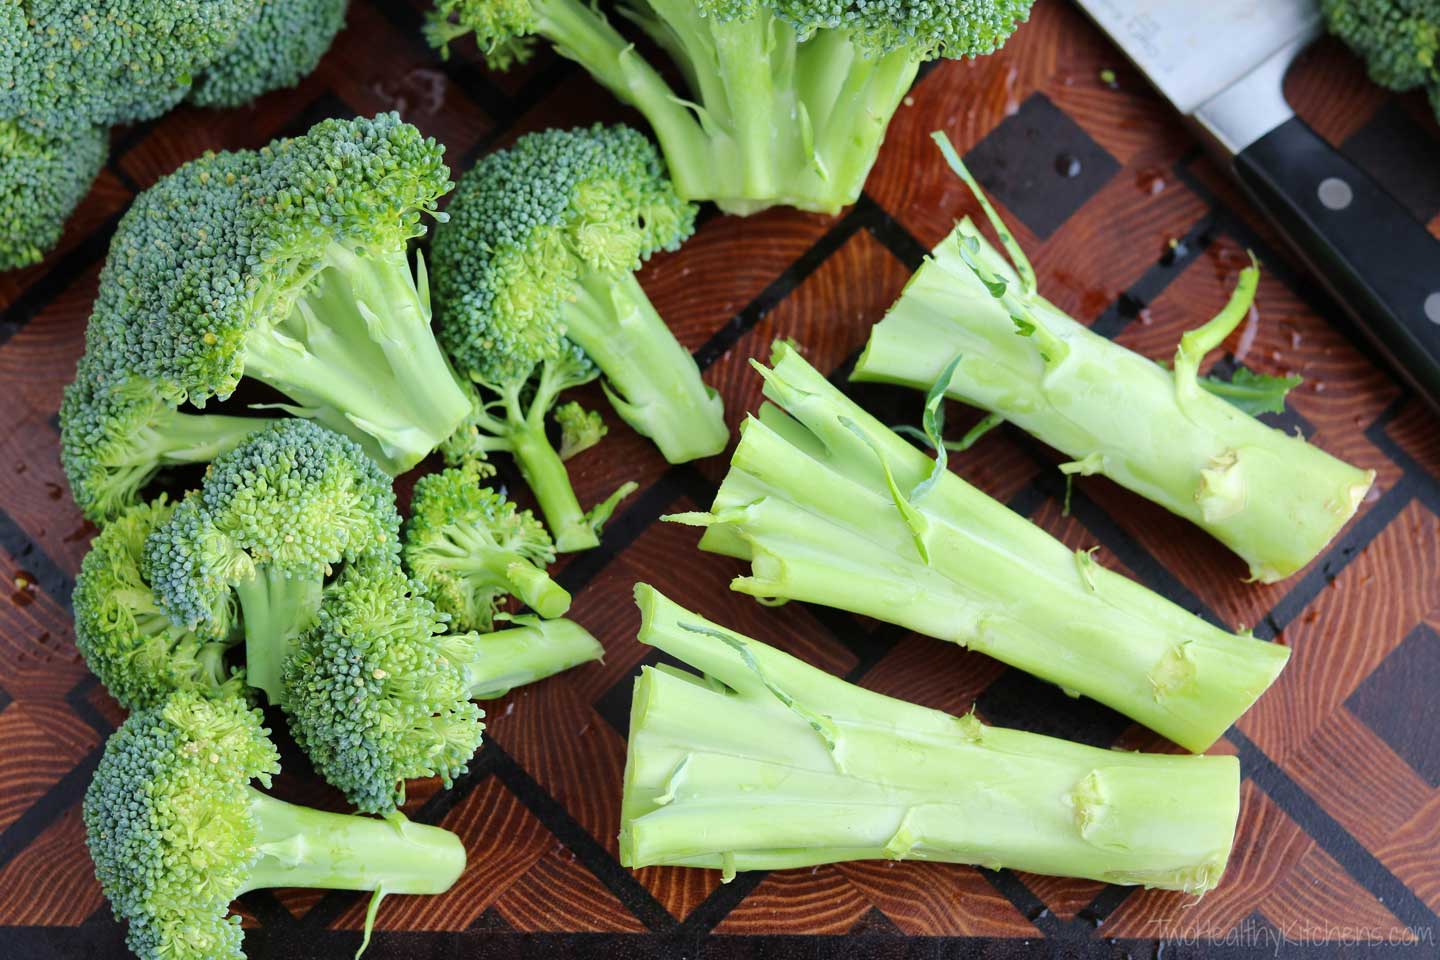 There are so many ways to use broccoli stalks! From salads to stir-fries … just don’t throw them away and waste good money and all that great nutrition!